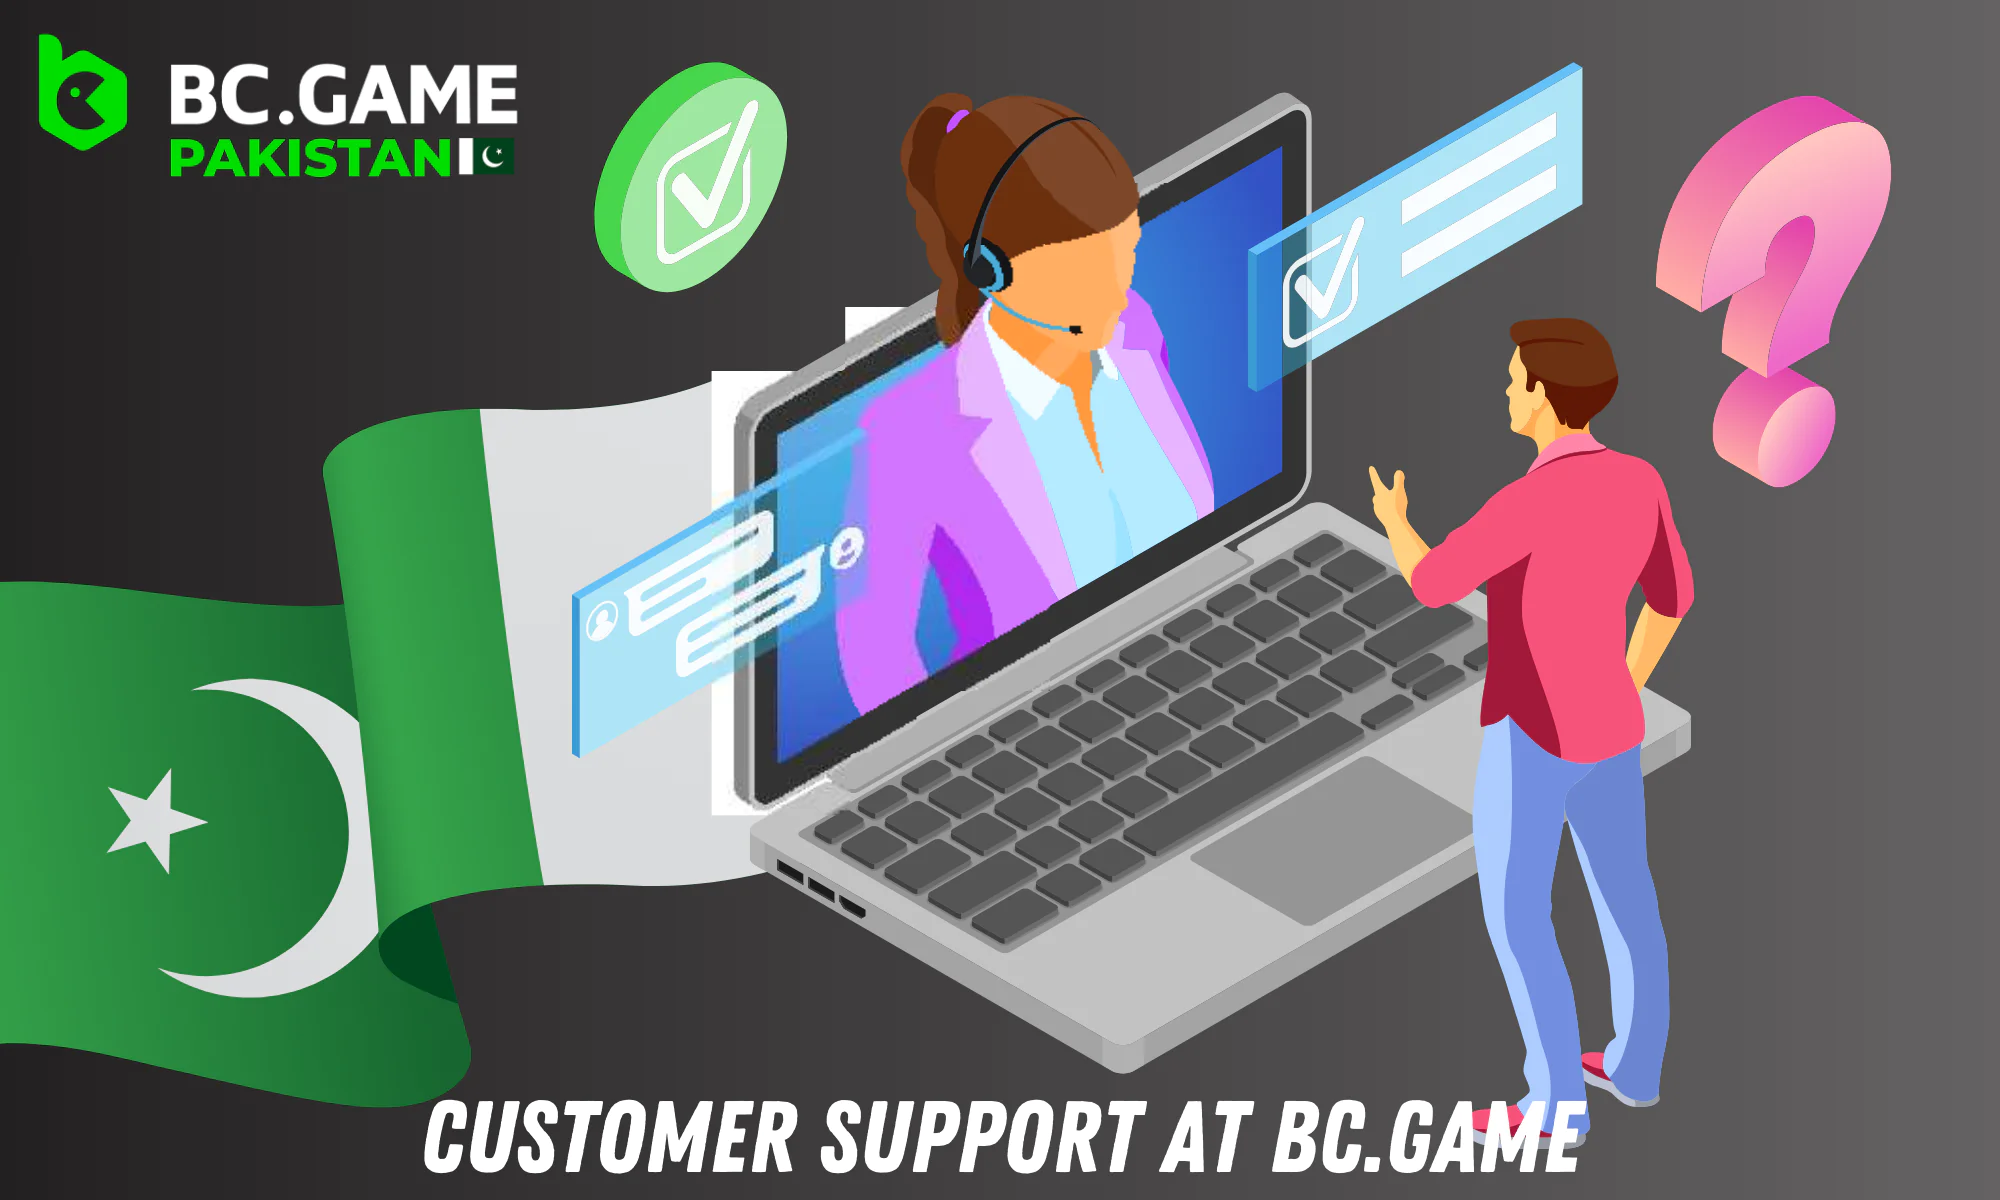 BC.Game Pakistan offers 24/7 customer support services